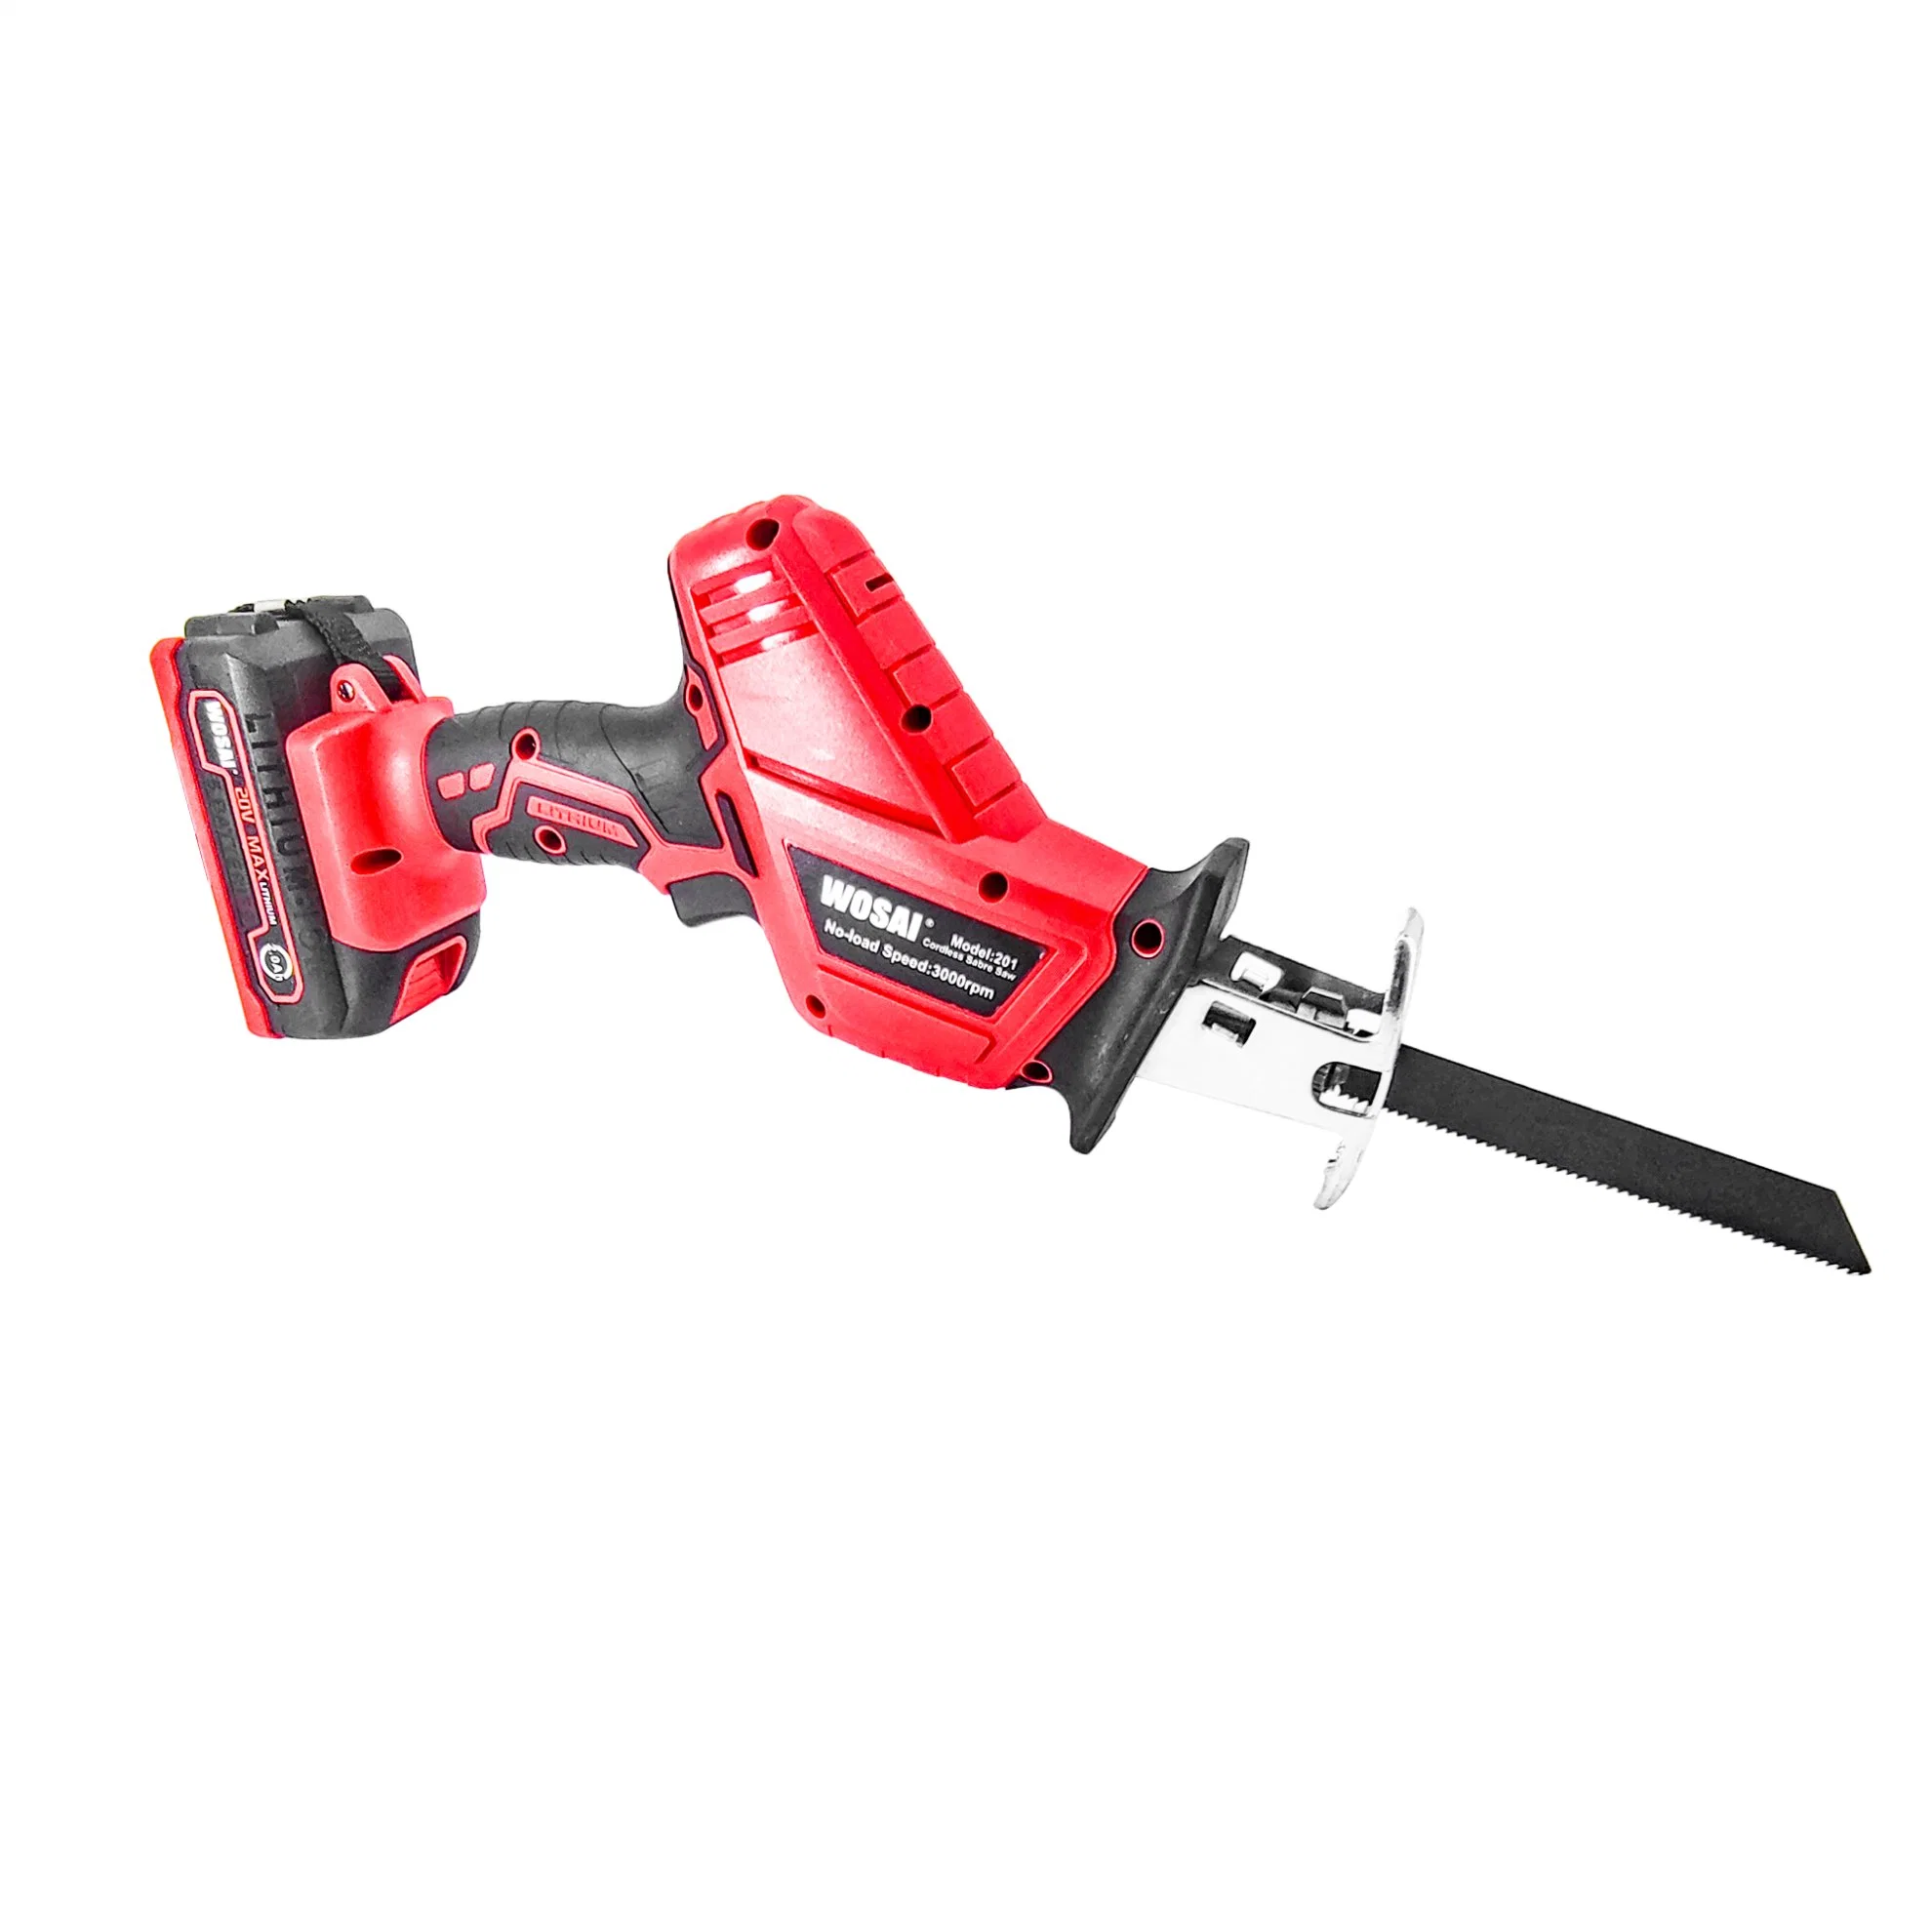 New 20V 1300mAh Wood Performance Cutting Type Fast High Cordless Saber Saw Reciprocating Saw